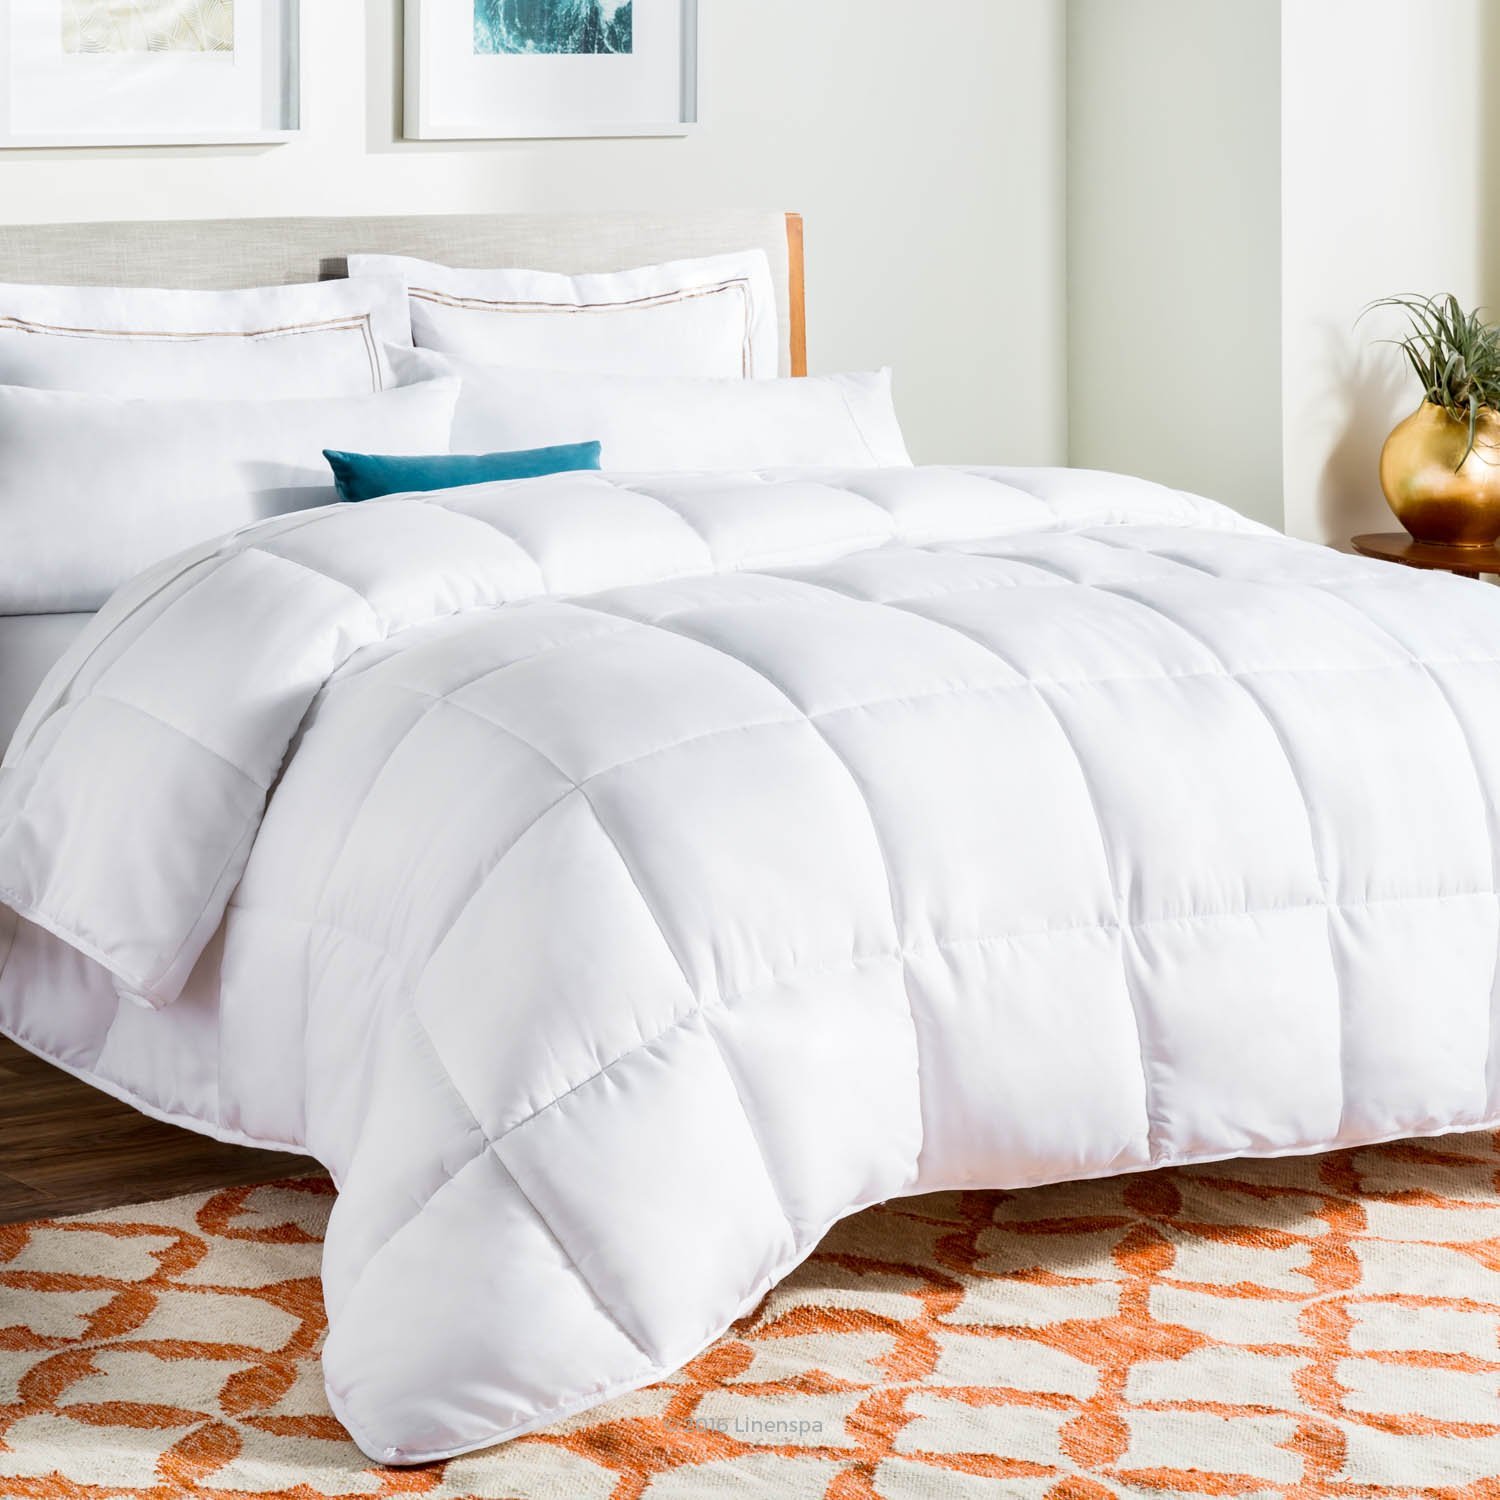 LinenSpa White Goose Down Alternative Quilted Comforter